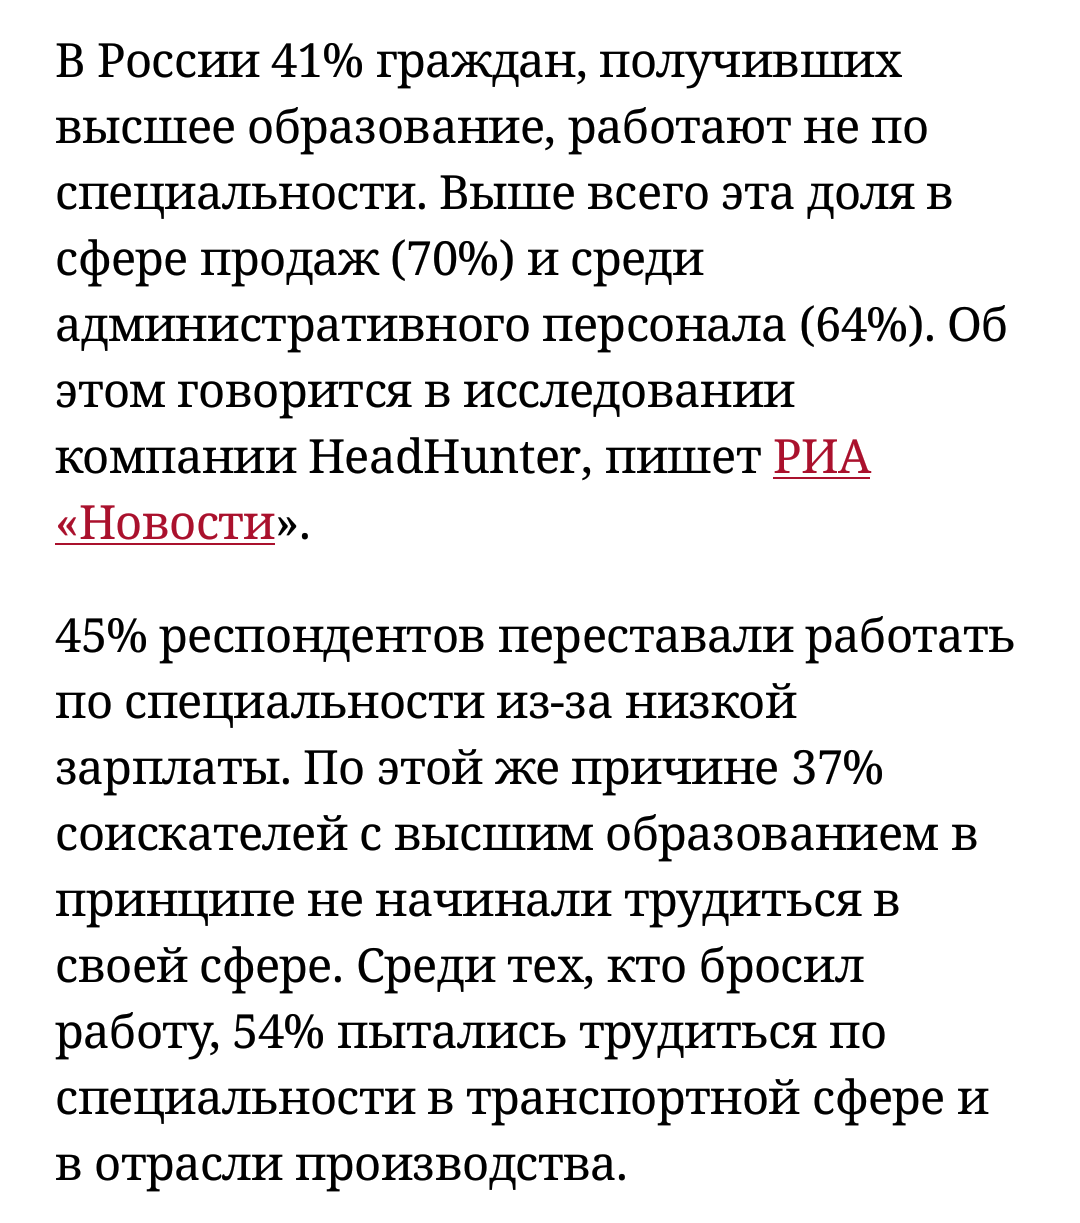 More than 40% of graduates of Russian universities choose a job not in their specialty - Specialists, Studying at the University, Statistics, Longpost